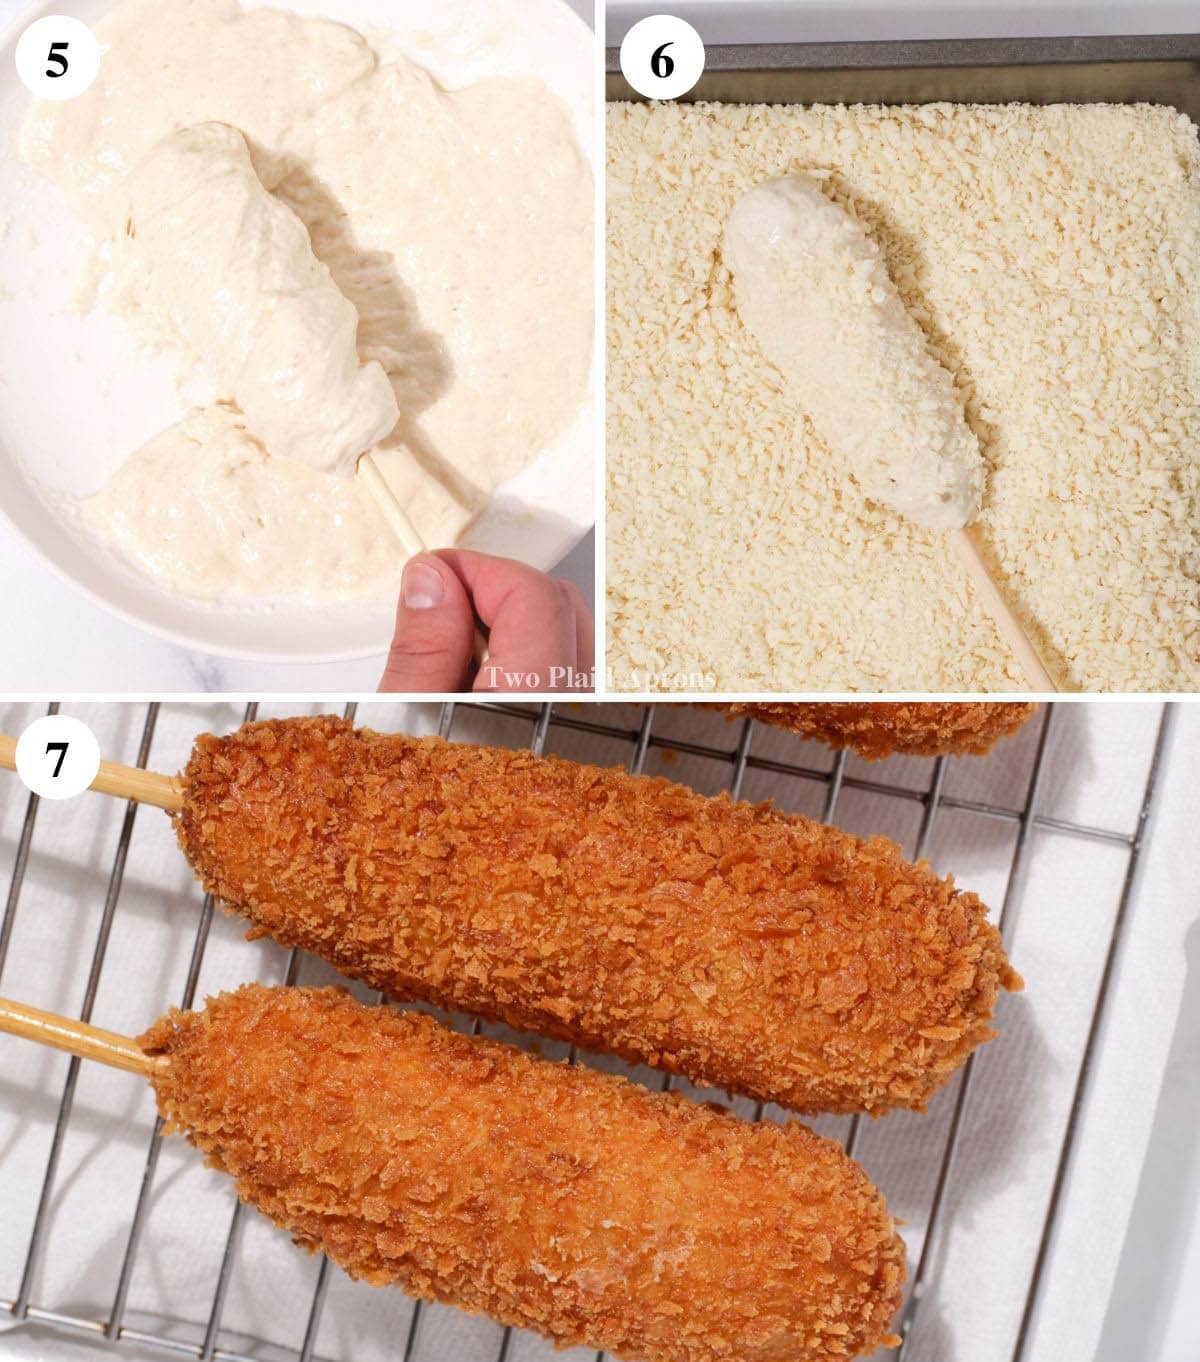 Step by step of battering and frying corn dogs.